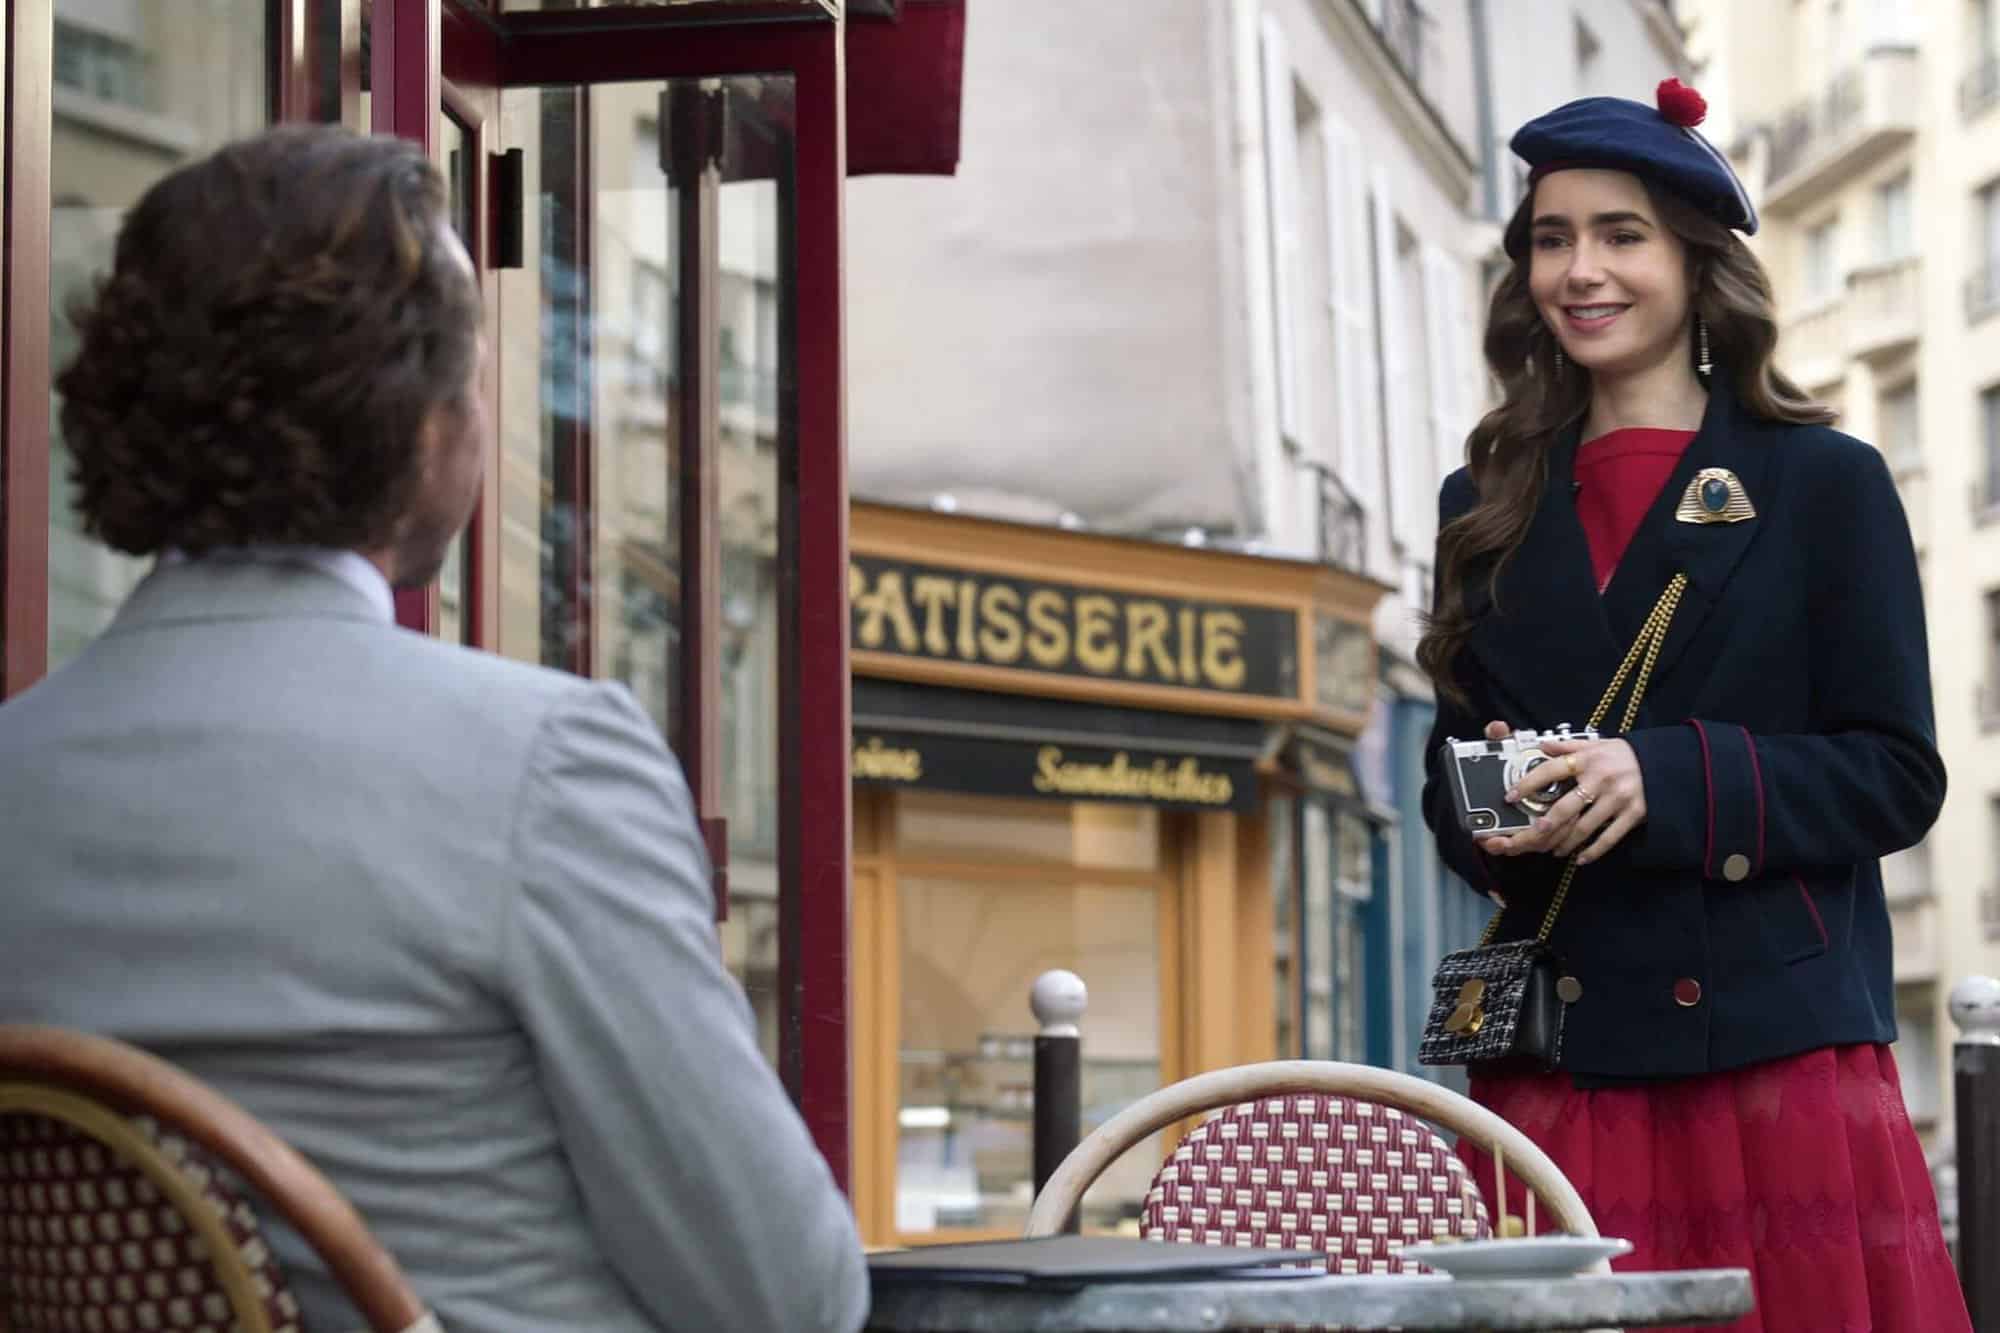 A woman with brown hair wearing a blue beret, blue jacket, and a red dress standing in front of a man with his back to the camera sitting outside at a café. A pastry shop with "patisserie" written on it can be seen in the background. The woman is Emily from "Emily in Paris."